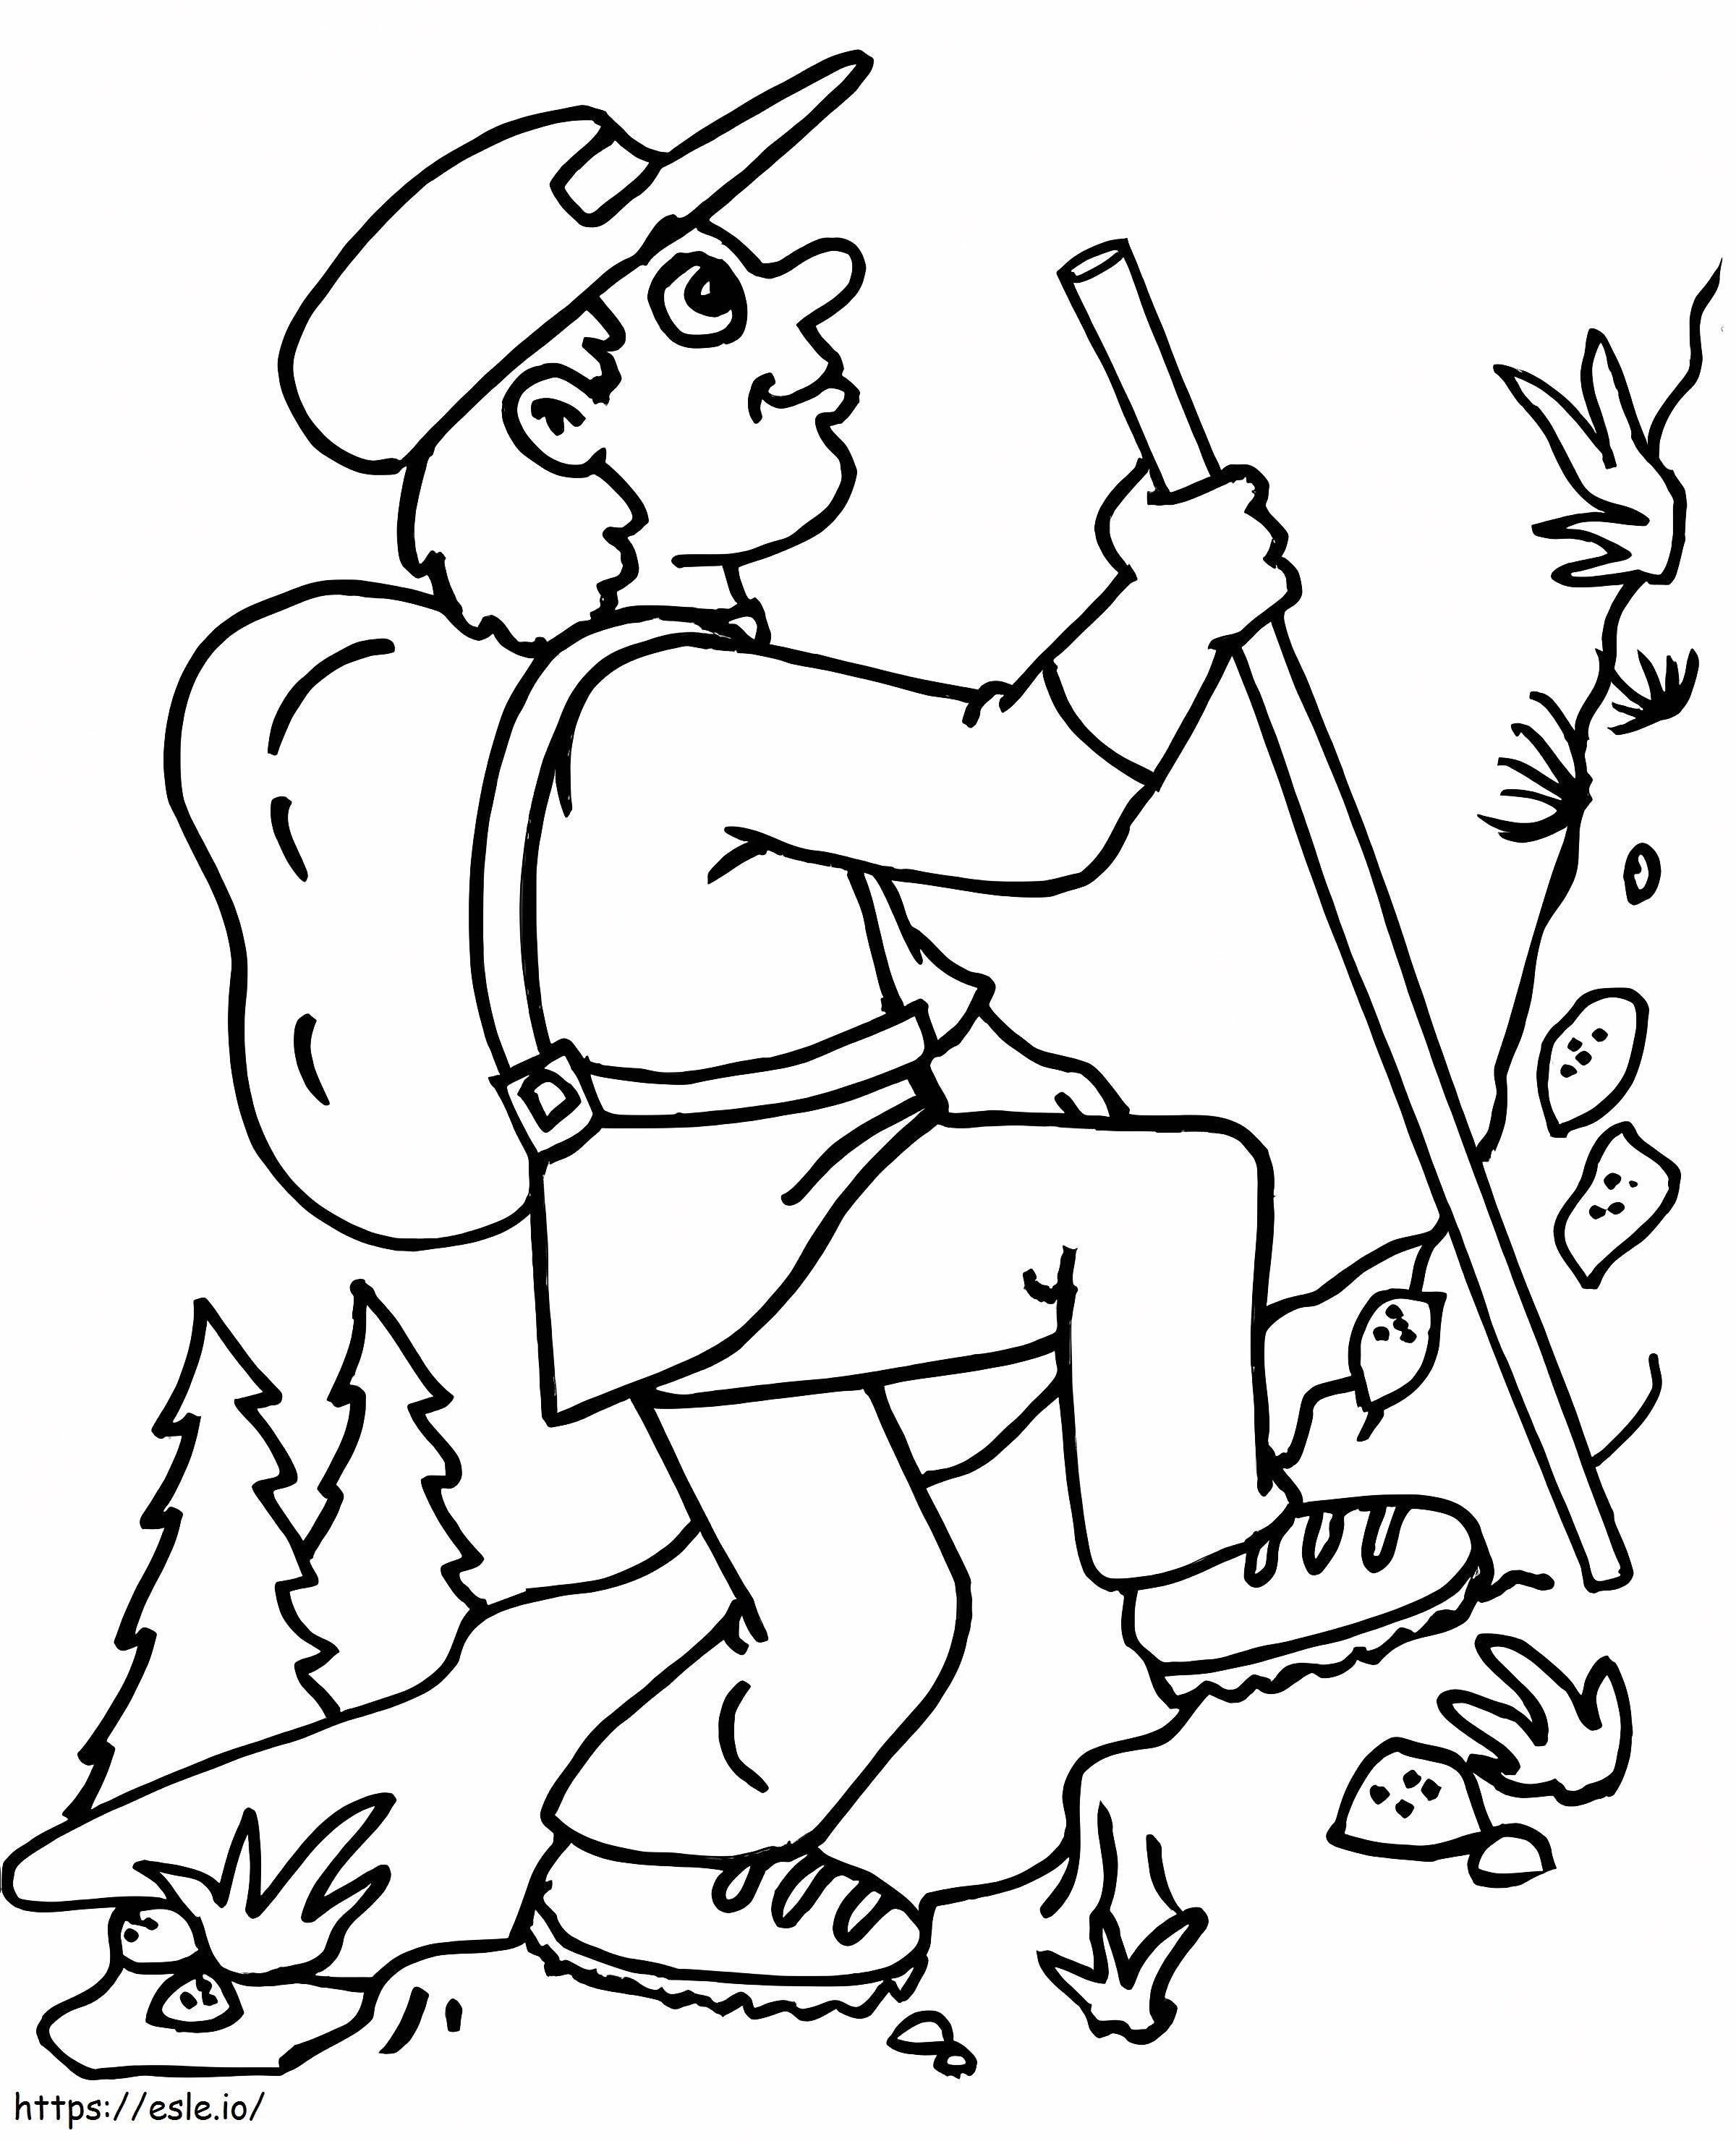 Mountaineering Man coloring page